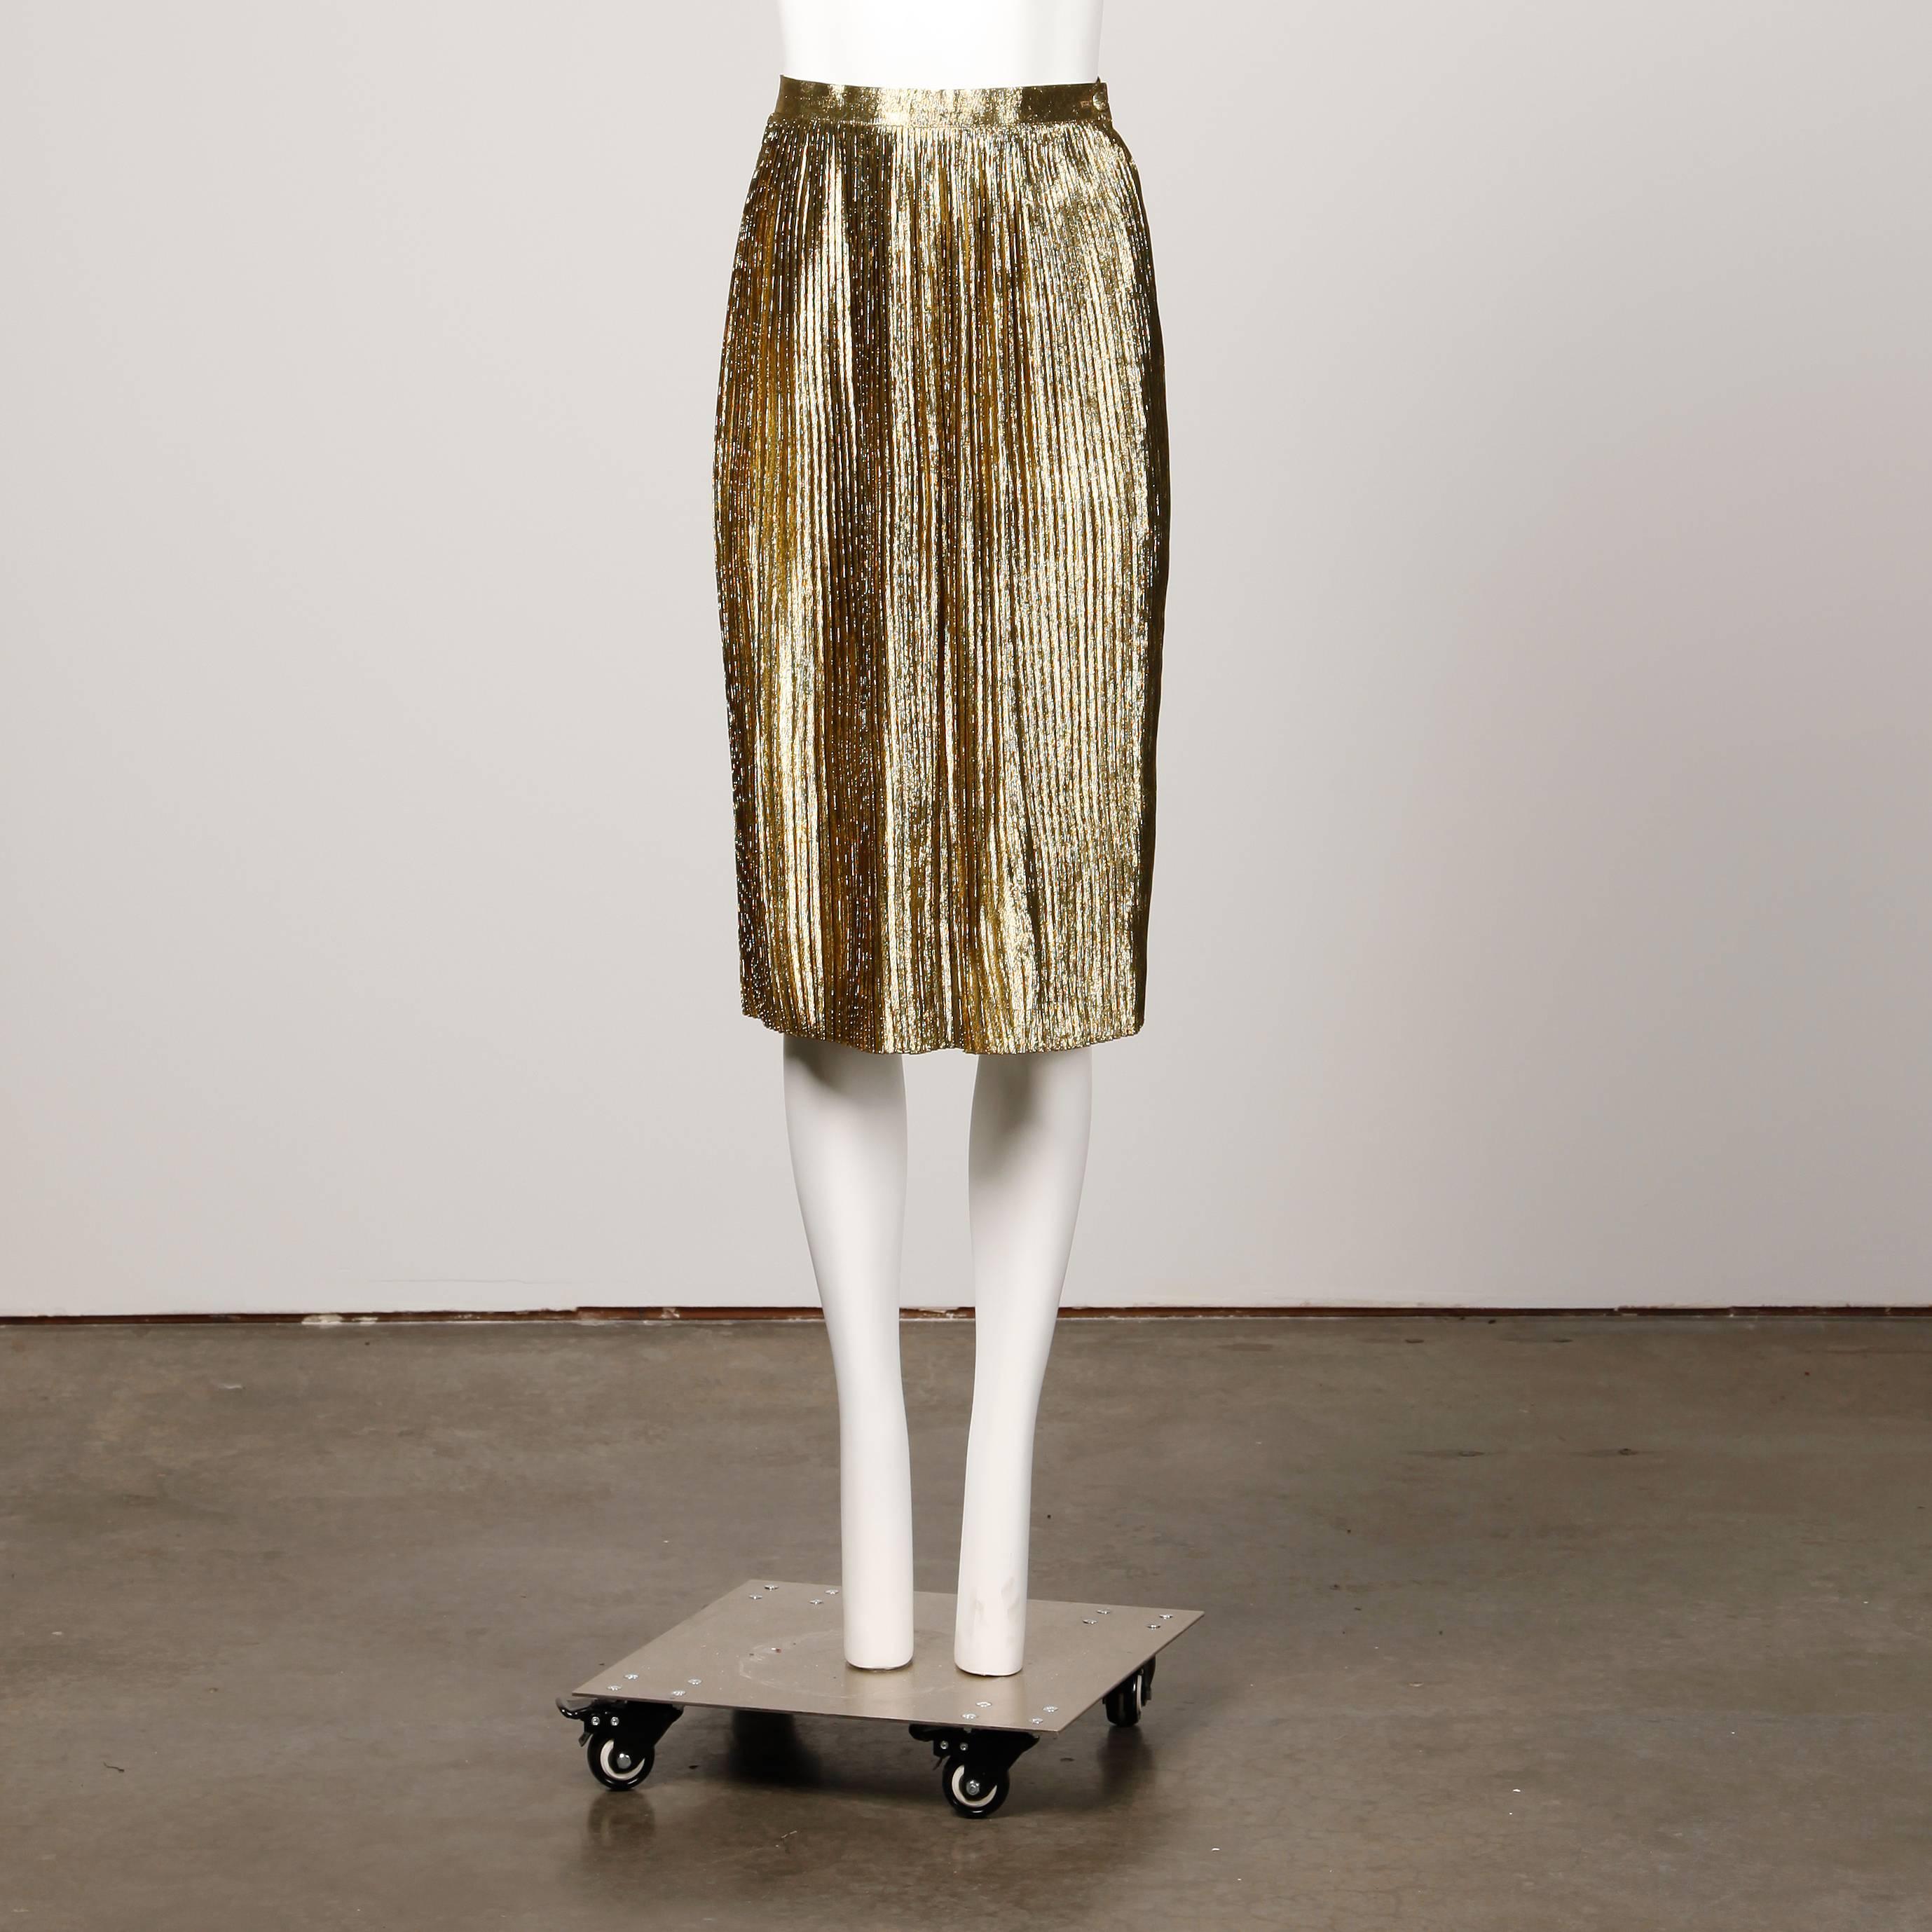 Shiny metallic gold lamé pleated pencil skirt by Christian Dior circa 1980s.

Details: 

Unlined
Side Snap and Button Closure
Marked Size: Unmarked
Estimated Size: Small
Color: Metallic Gold
Fabric: 67% Silk/ 33% Polyester
Label: